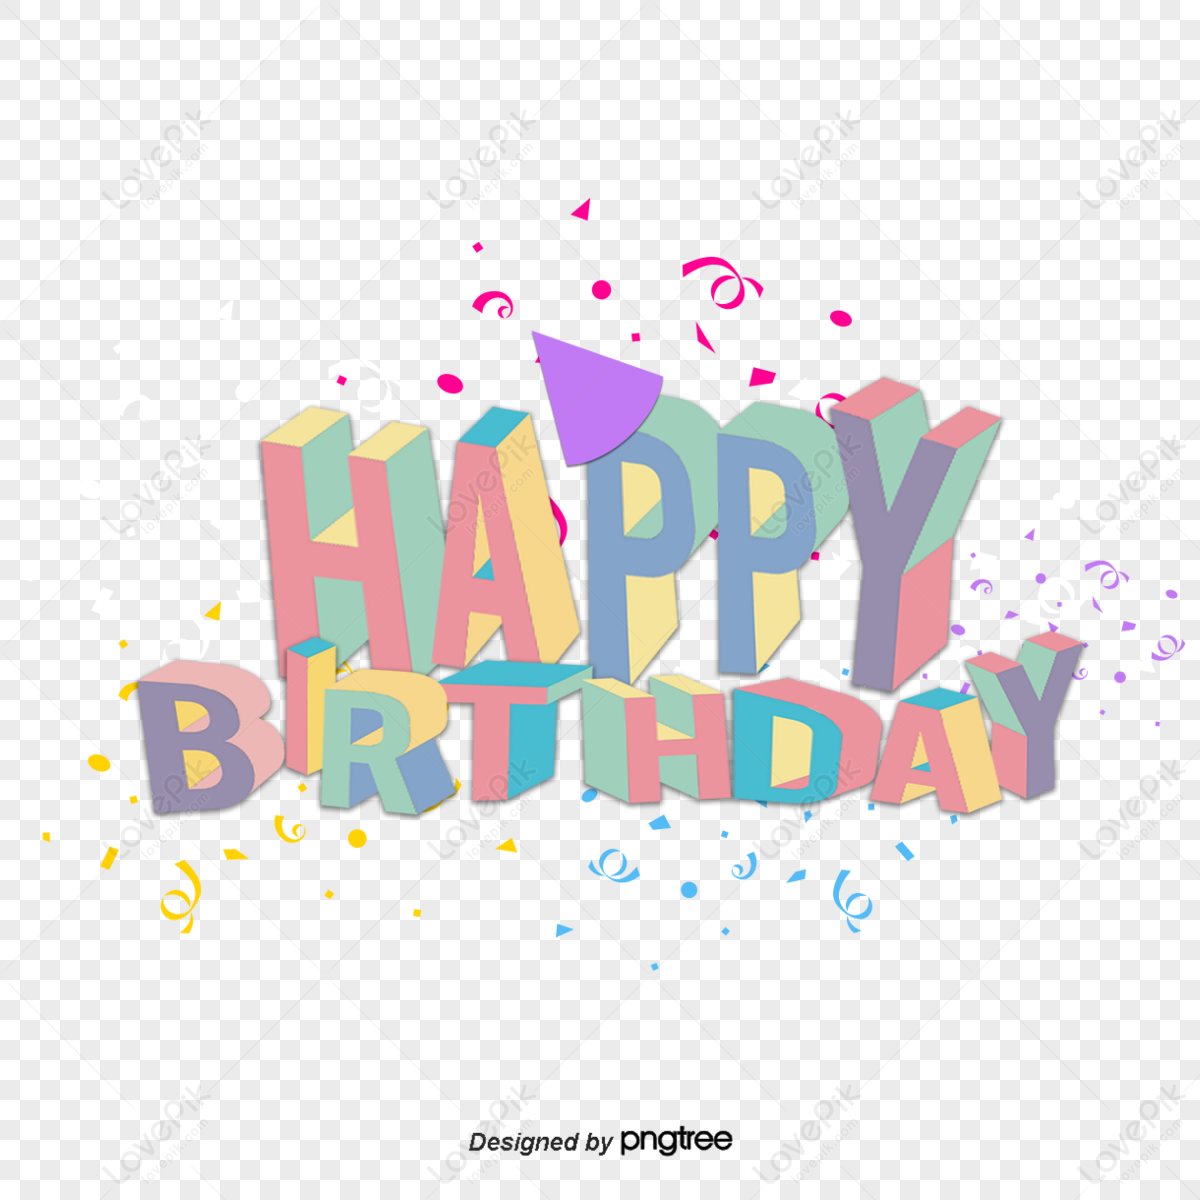 Birthday Poster PNG Images With Transparent Background | Free Download ...